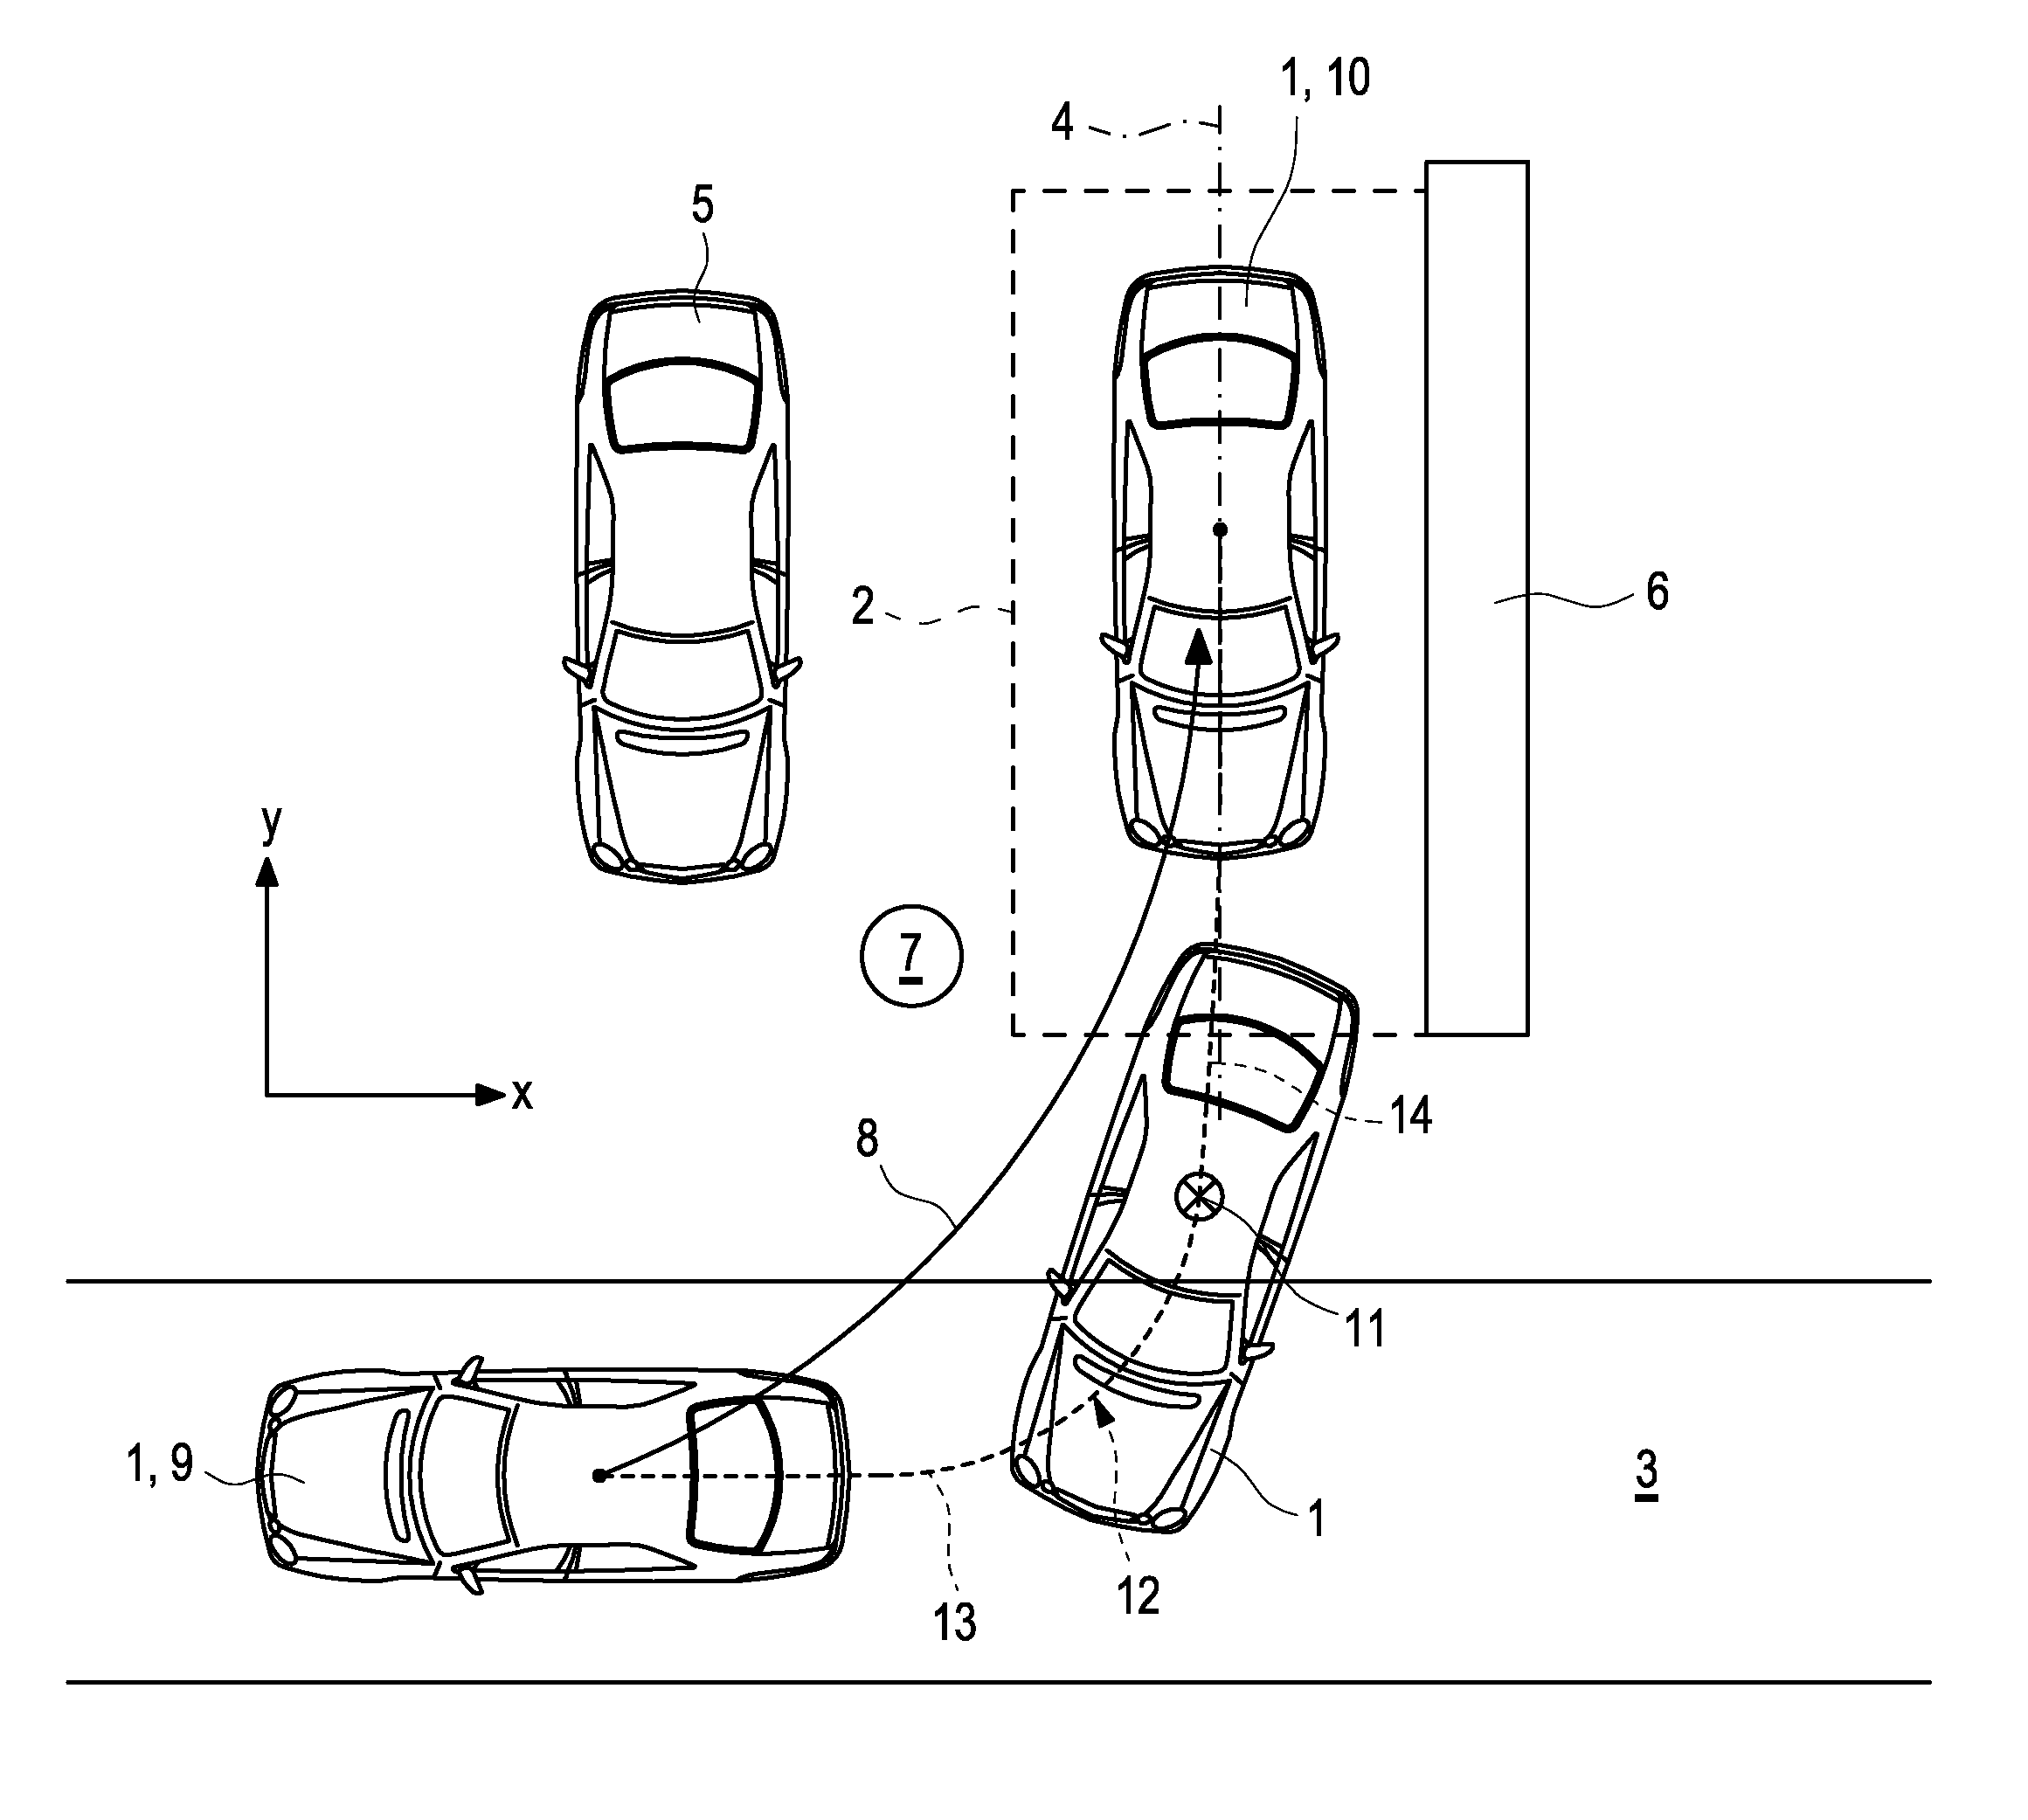 Method for Carrying Out a Process of Parking a Vehicle by Means of a Driver Assistance System